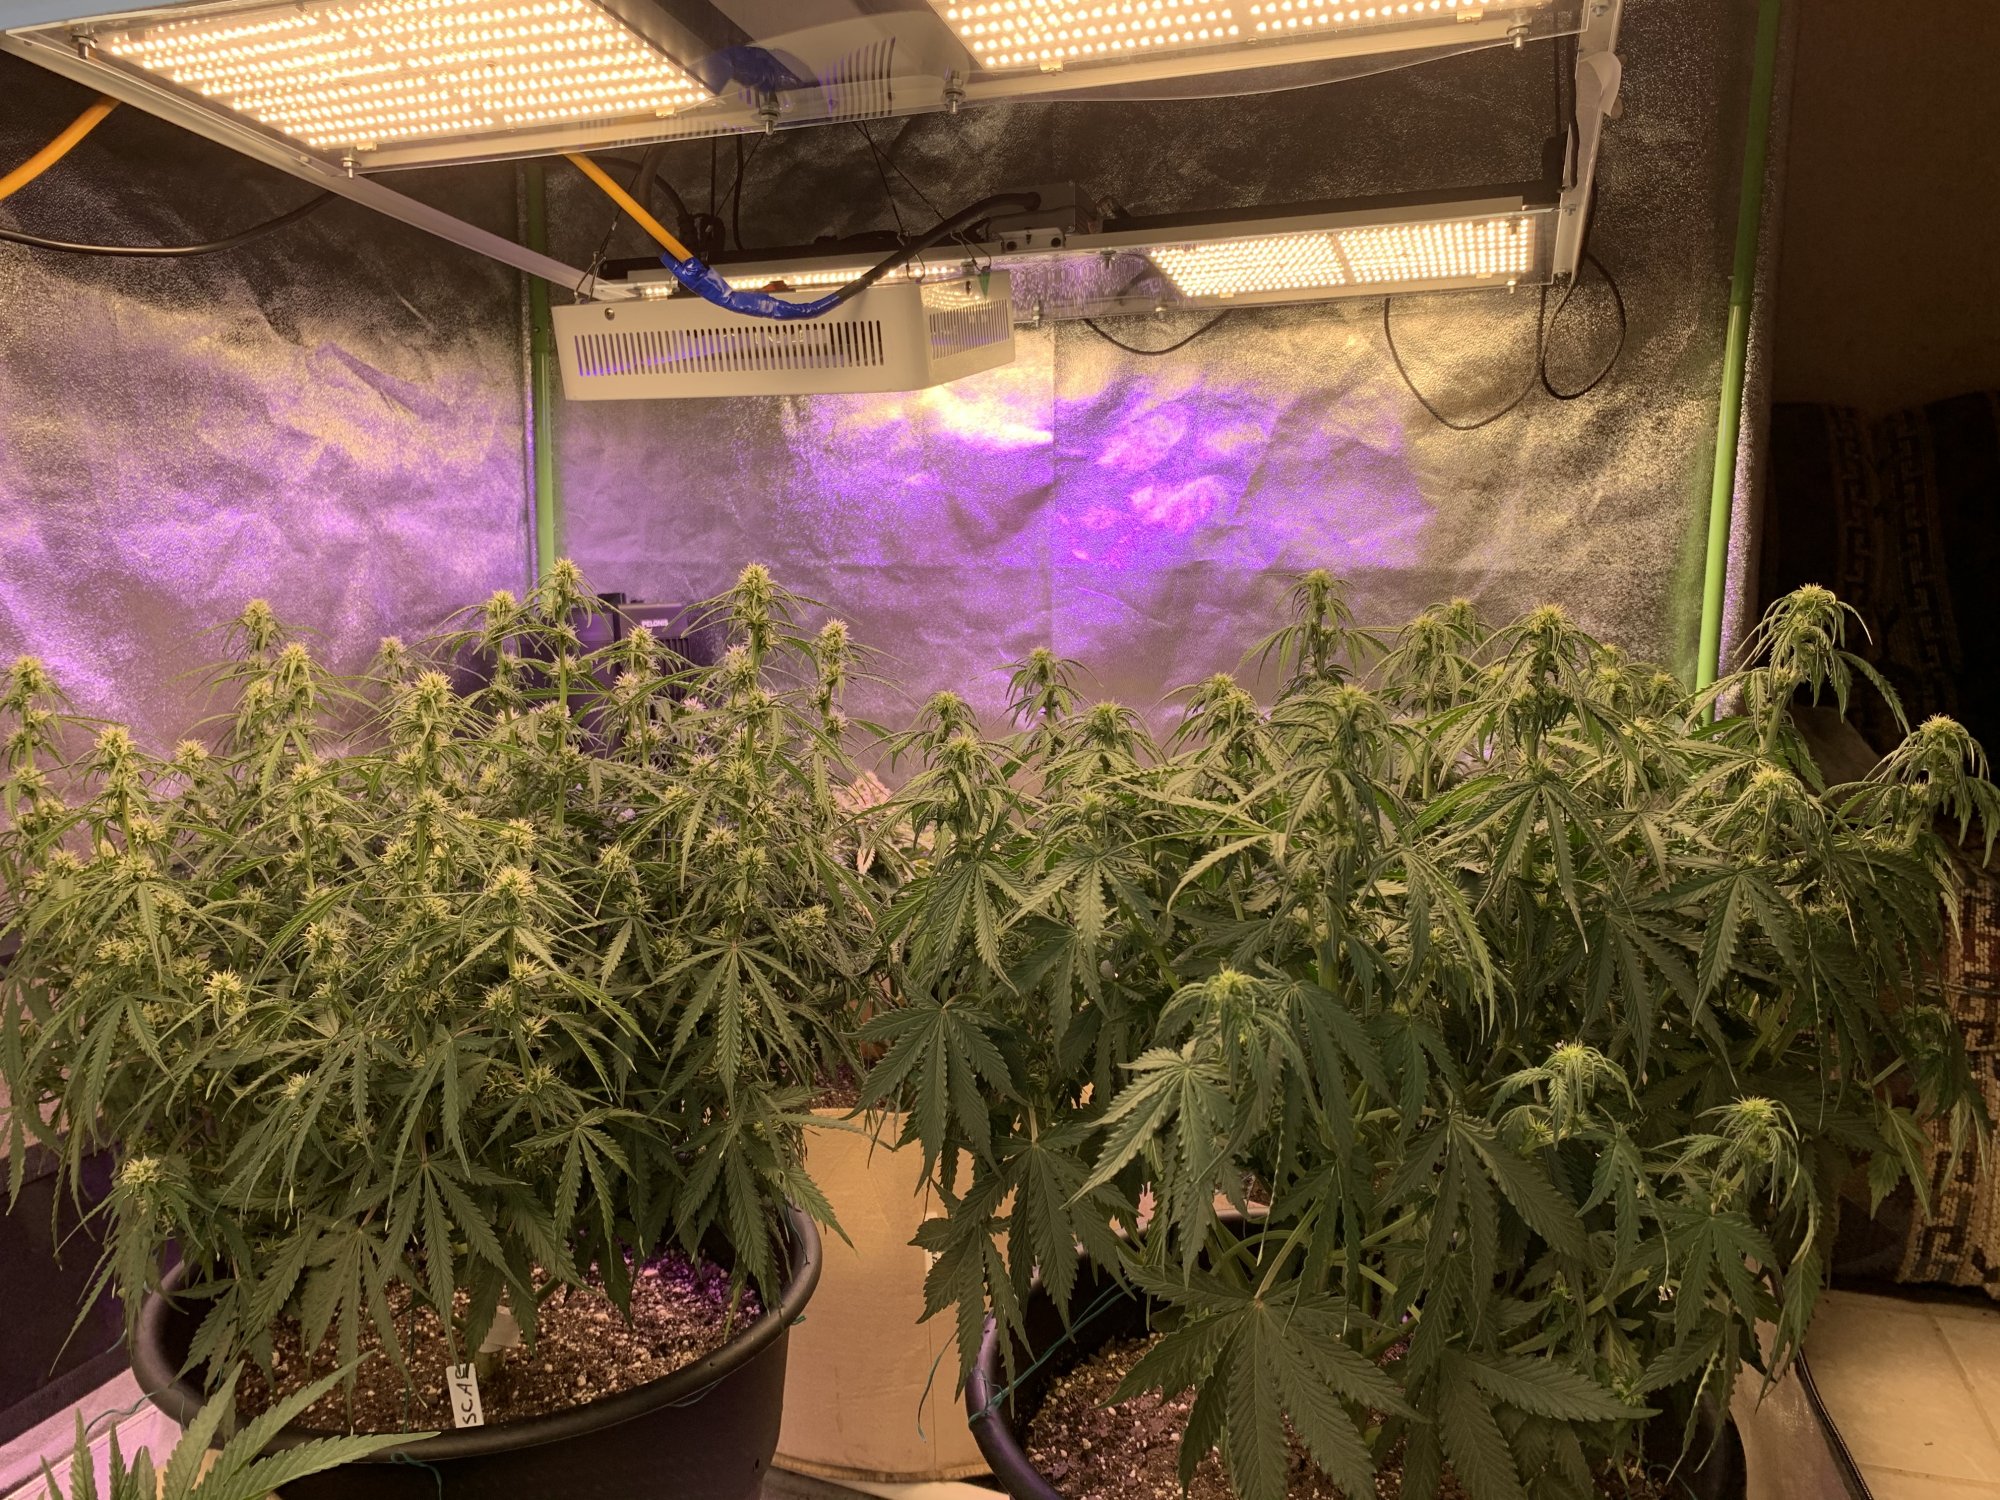 New grower using hlg quantum boards 4